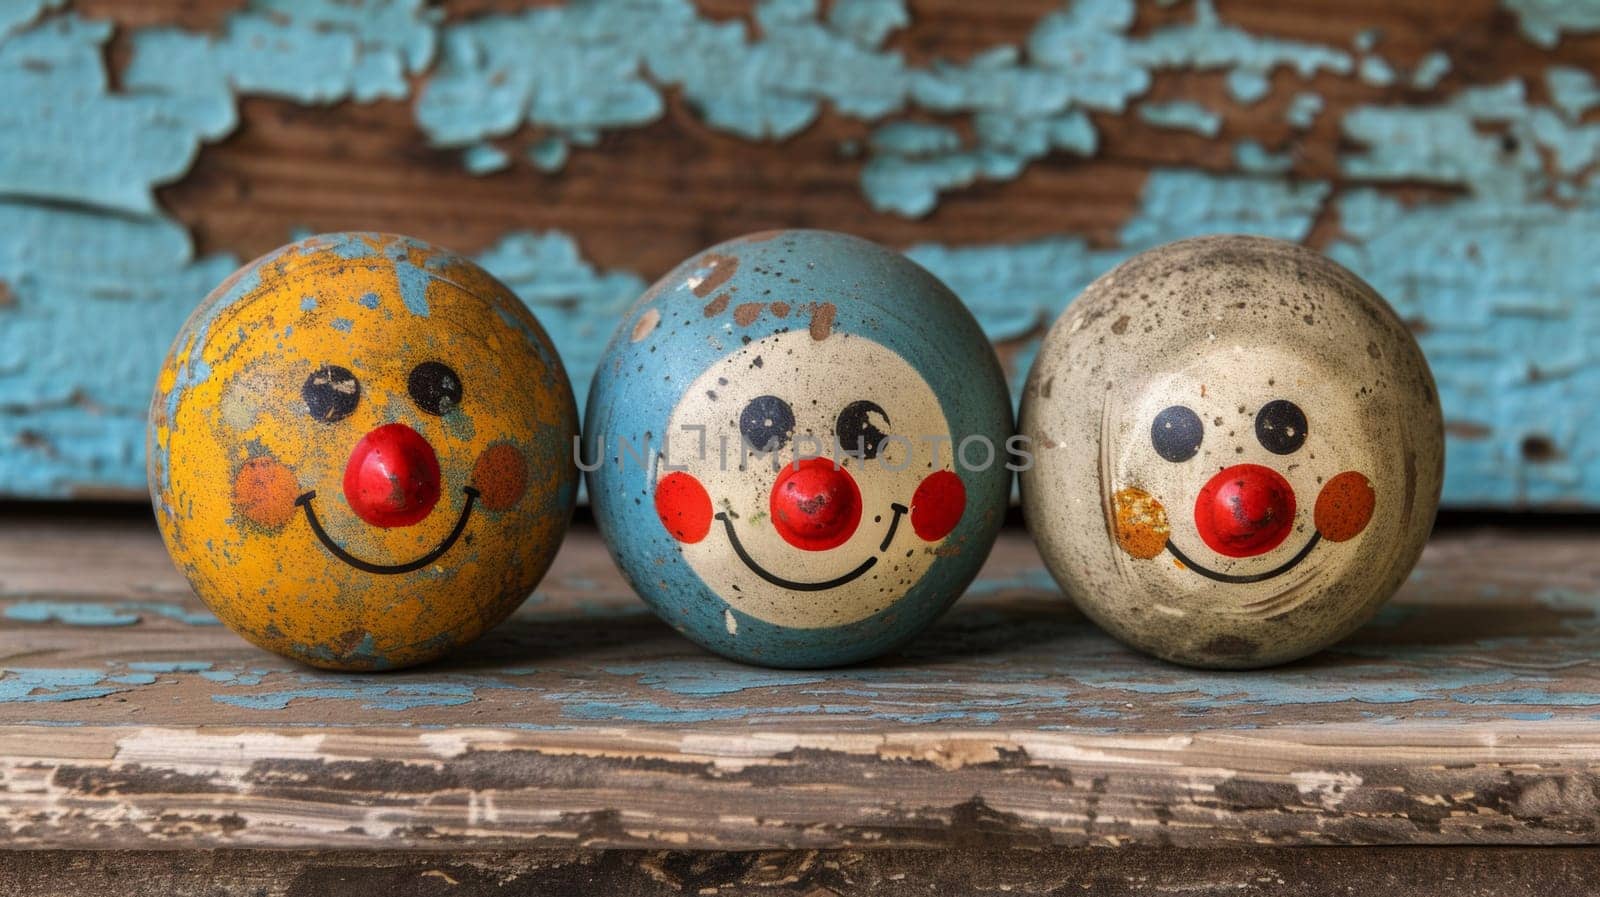 Three painted eggs with clown faces on them sit next to each other